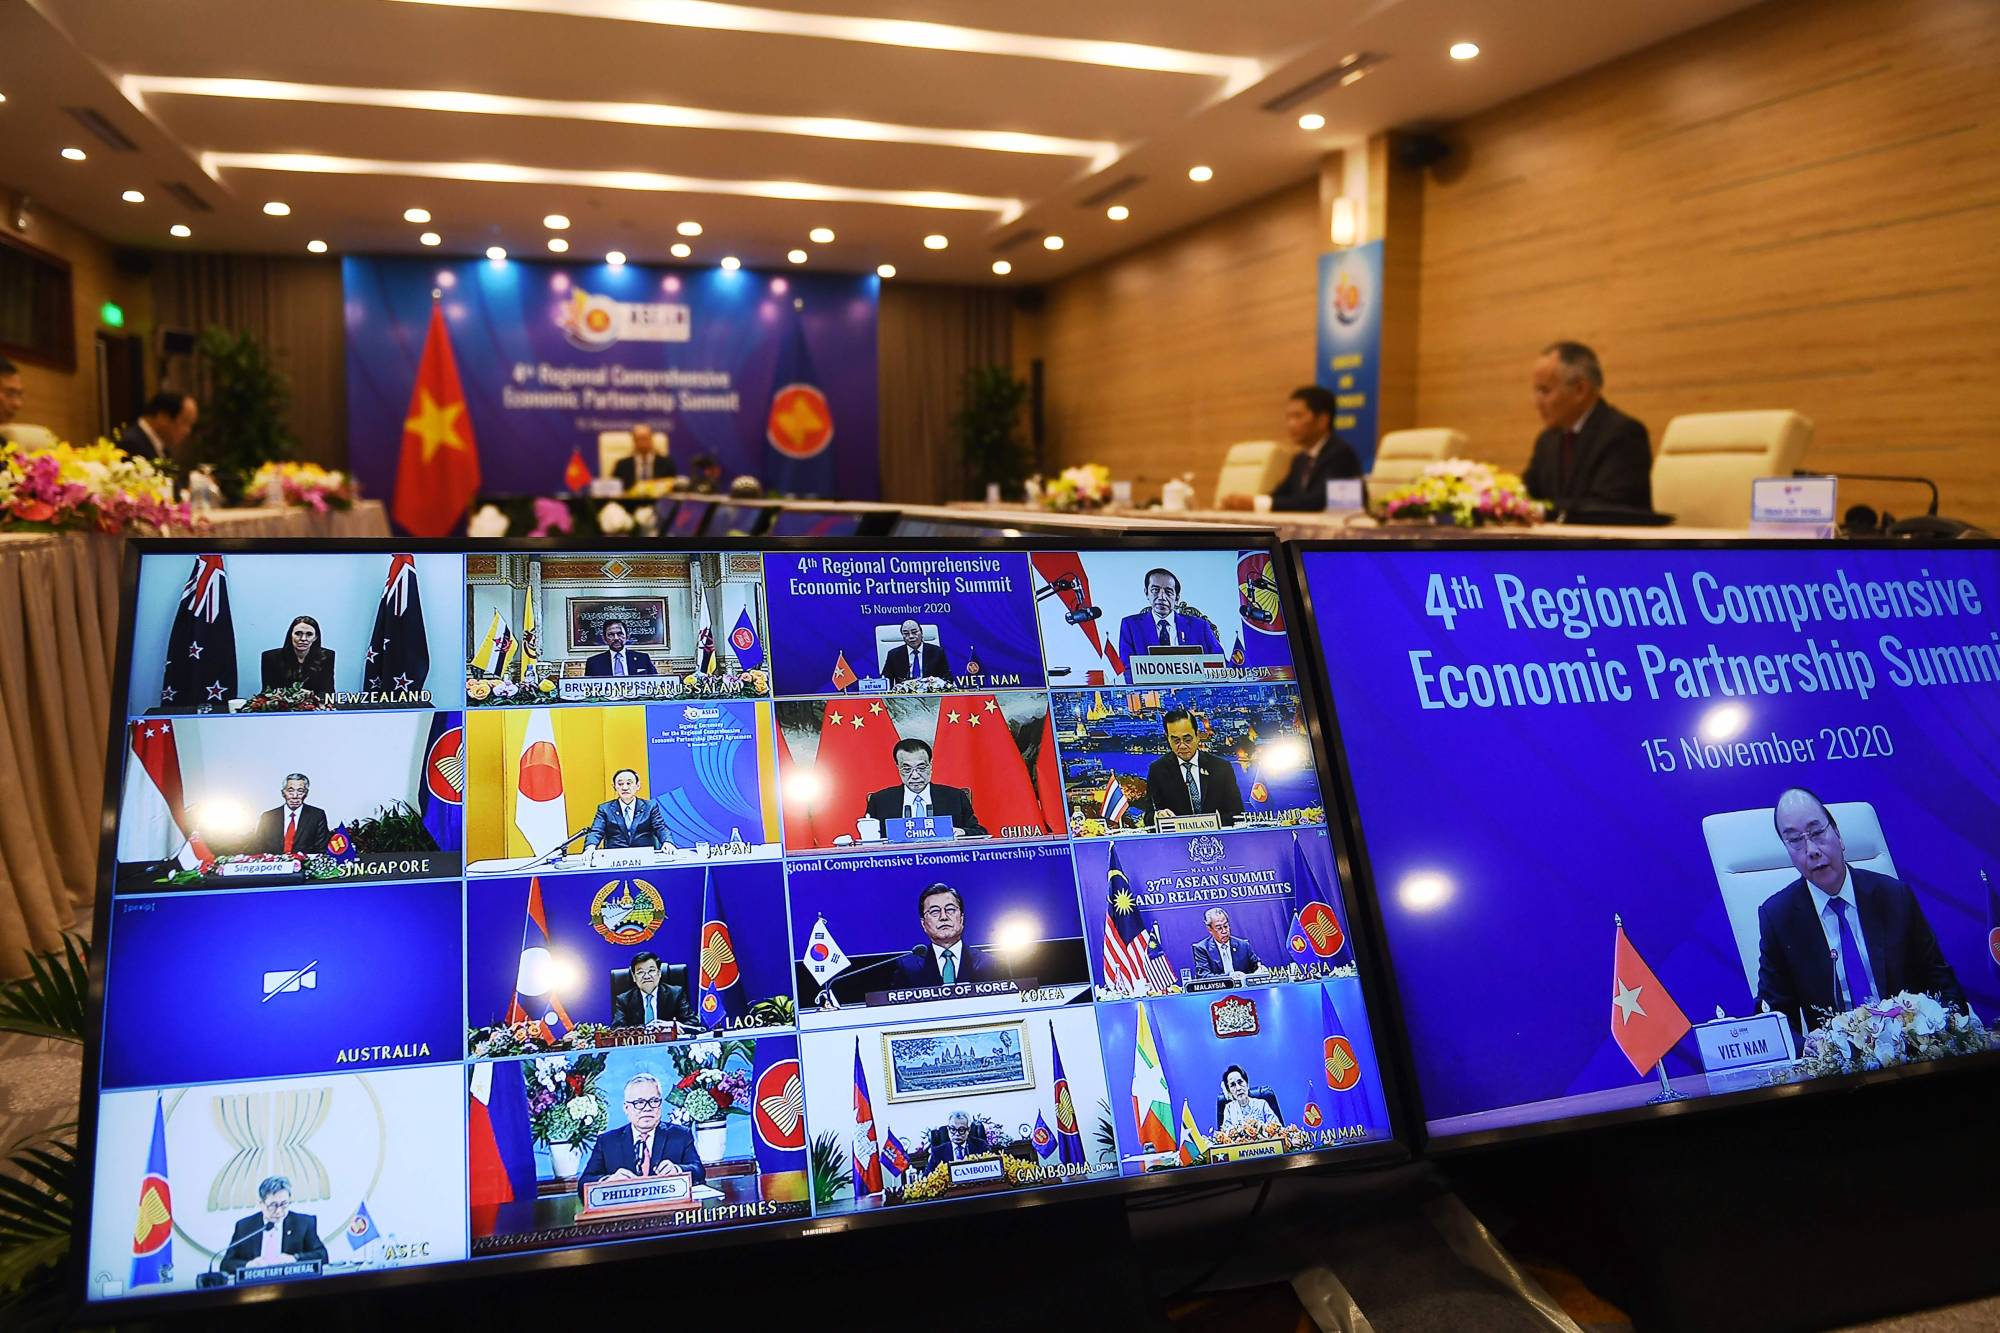 Leaders of the Asia-Pacific nations attend the Regional Comprehensive Economic Partnership (RCEP) summit online on Sunday. | AFP-JIJI